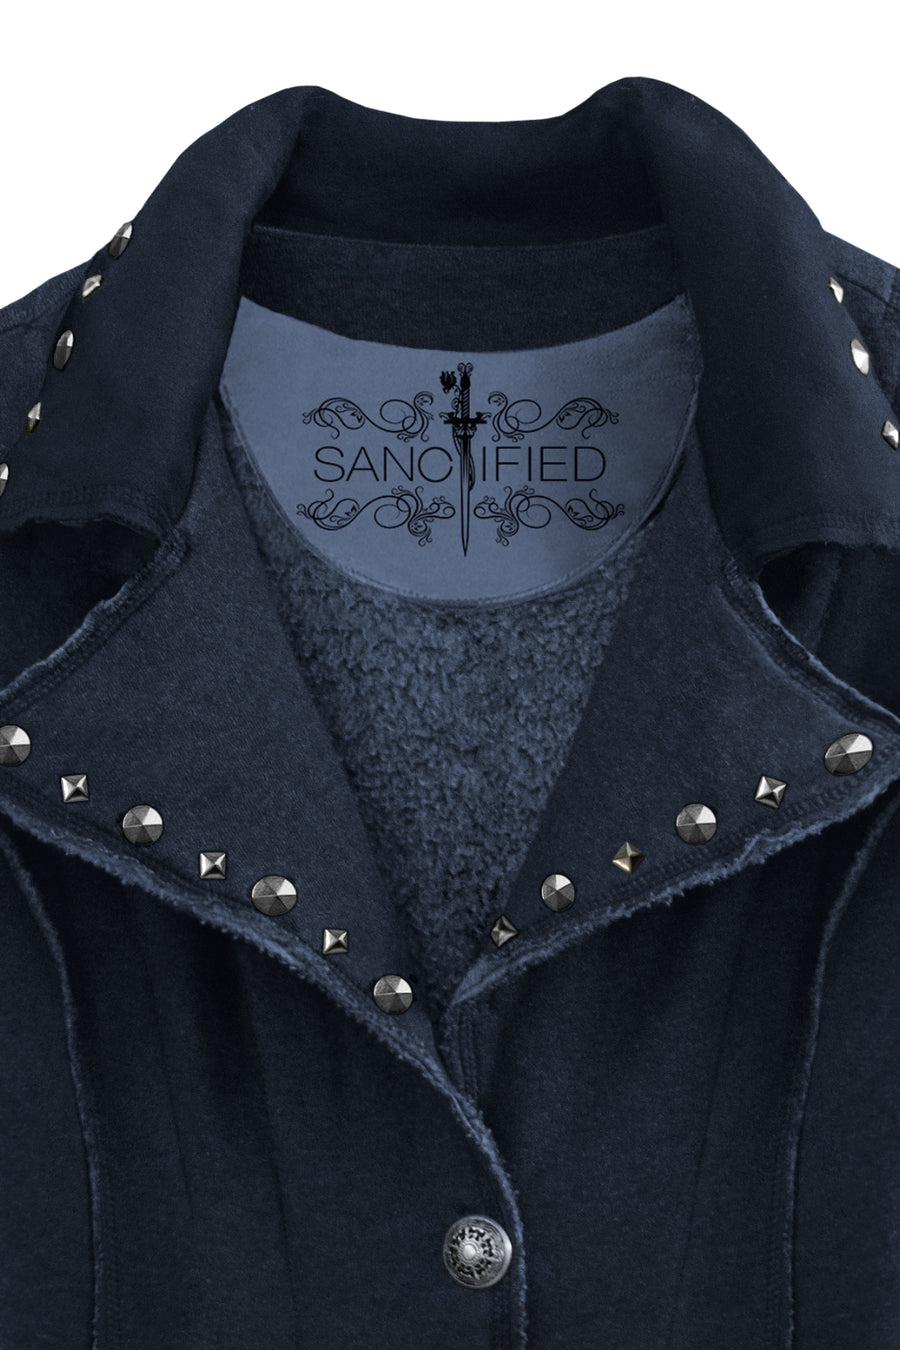 Christian Scripture Coat "Armor of God" by Sanctified Couture